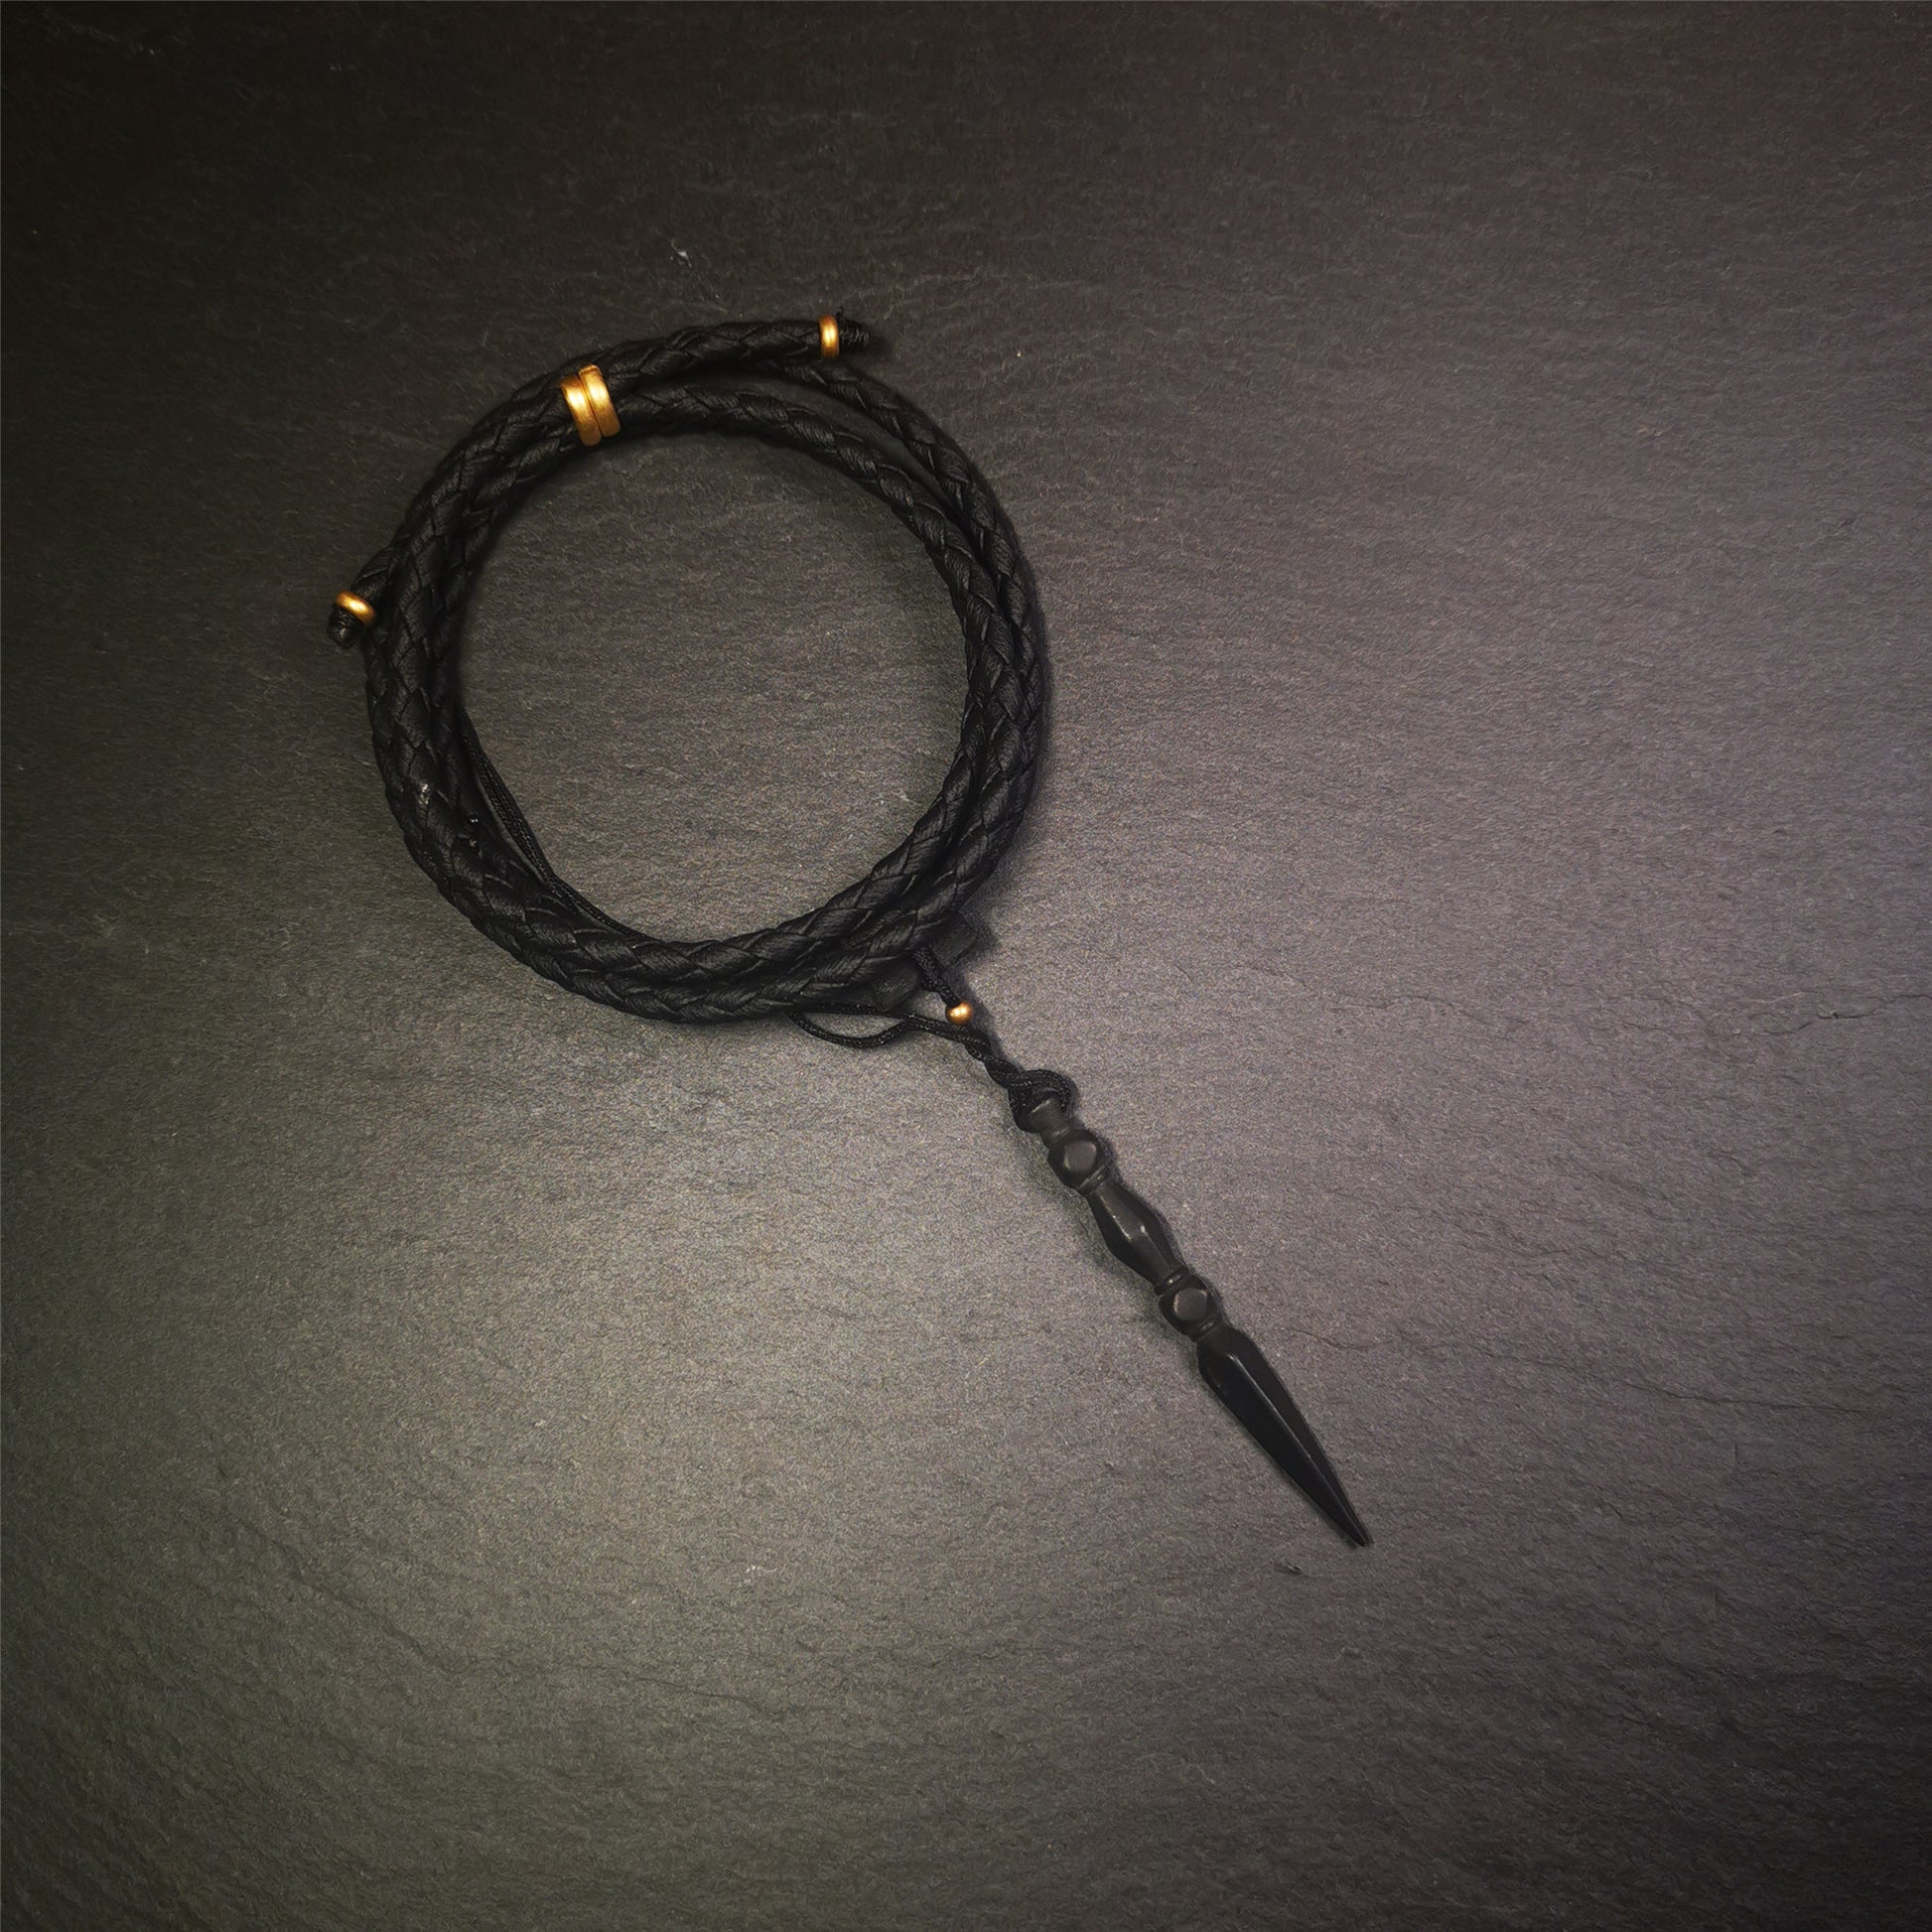 This handmade Dorje Phurba was crafted by Tibetan craftsmen from Hepo Town, Baiyu County, Tibet. The length is 2.2 inches,black color,the upper part is a vajra, and the lower part is a phurba.